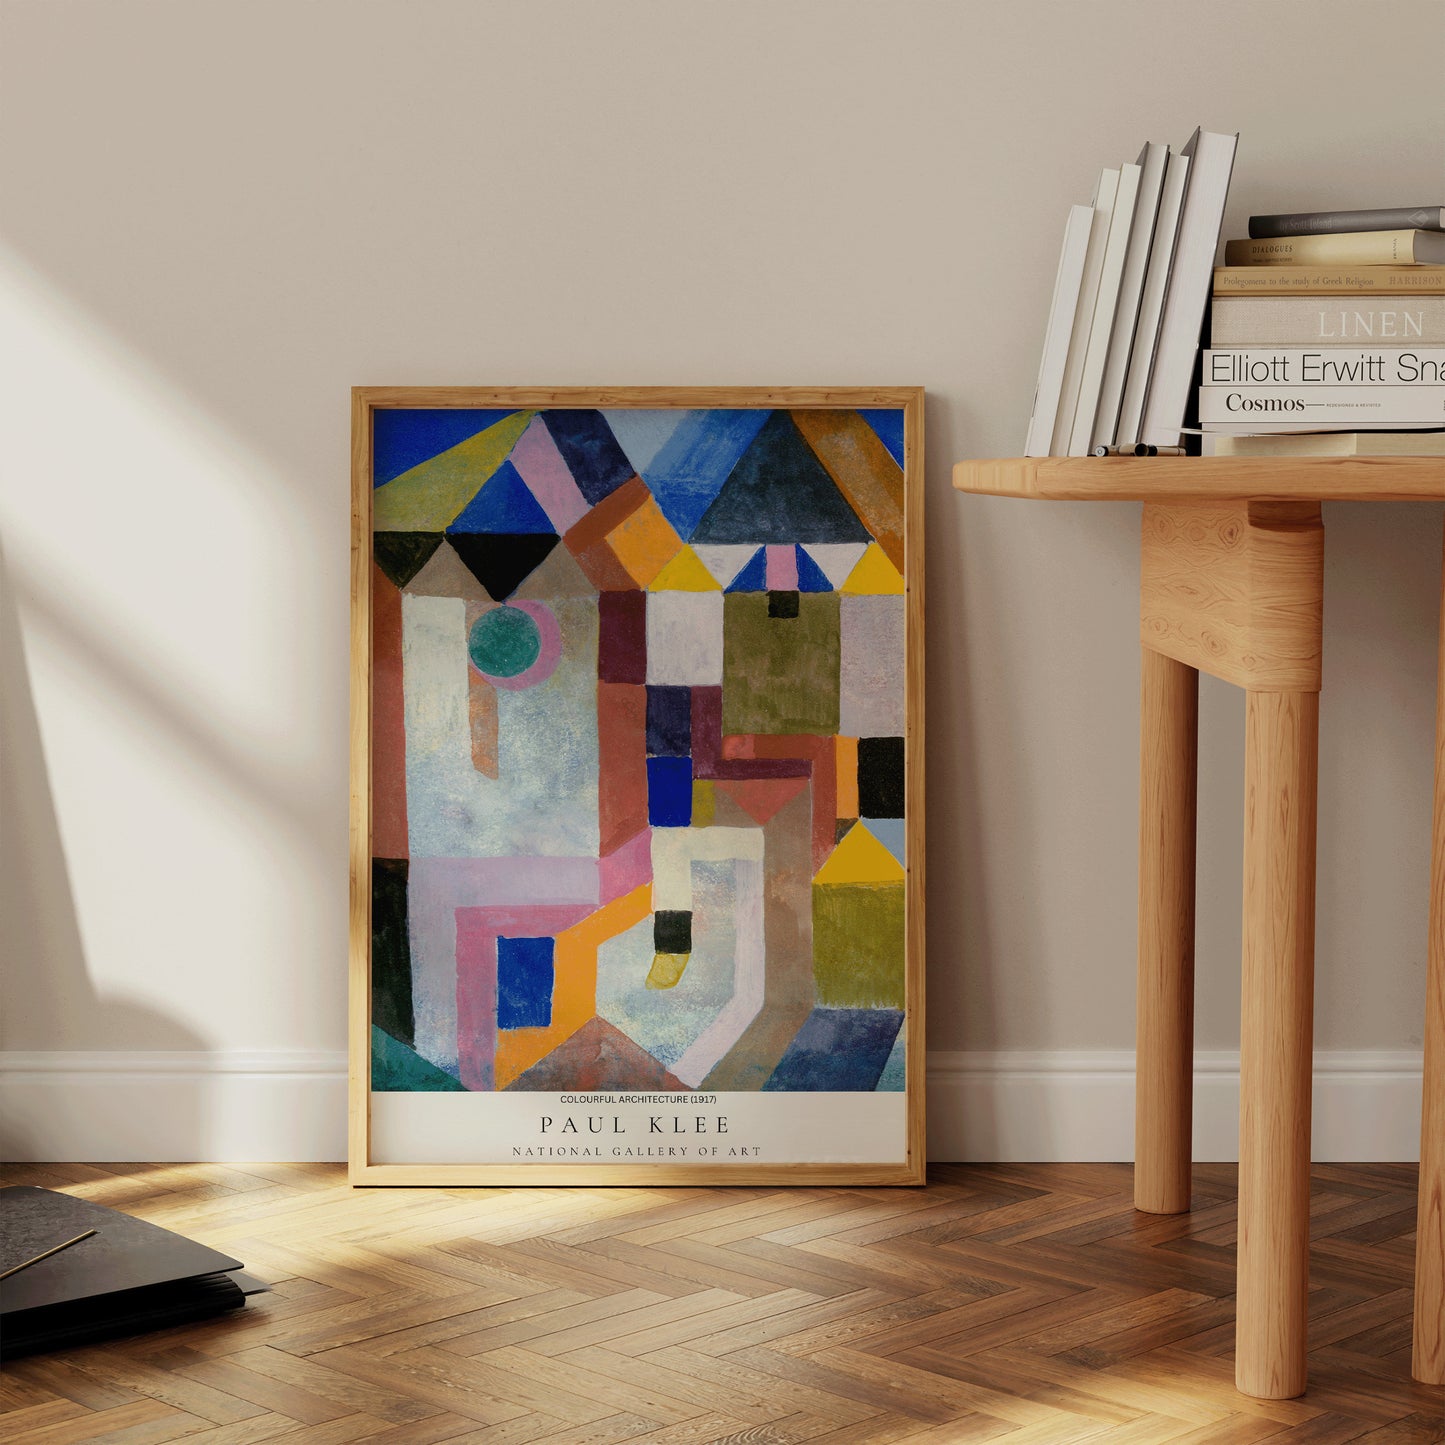 Paul Klee COLOURFUL ARCHITECTURE Poster Bauhaus Exhibition Poster Abstract Gallery Print Framed Ready to Hang Home Office Decor Museum Print